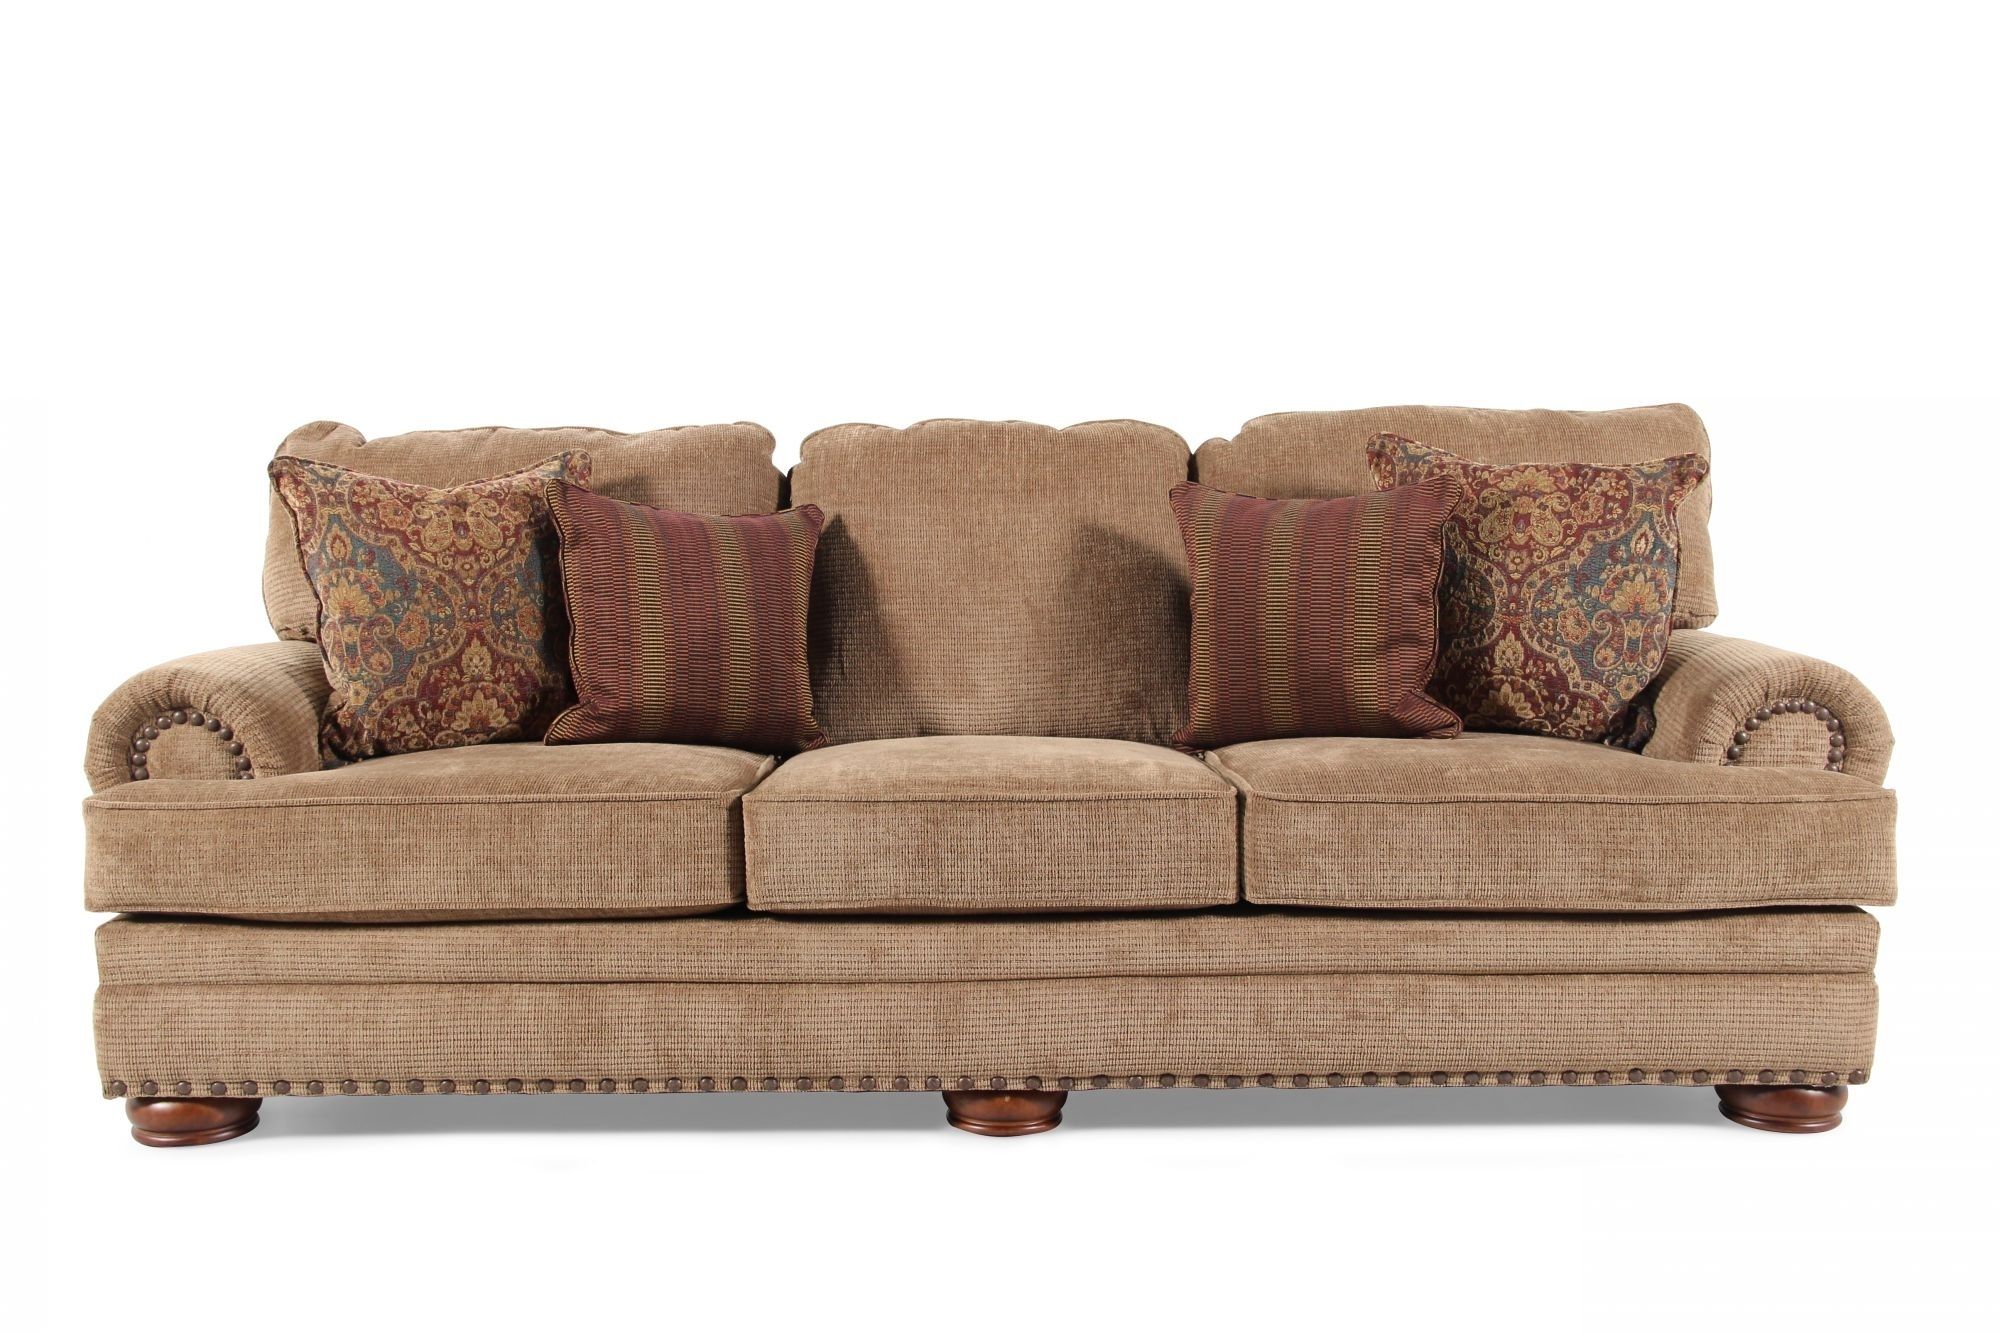 Mathis Brothers Living Room Furniture Sofas | Living Room Decor Throughout Mathis Brothers Sectional Sofas (Photo 2 of 10)